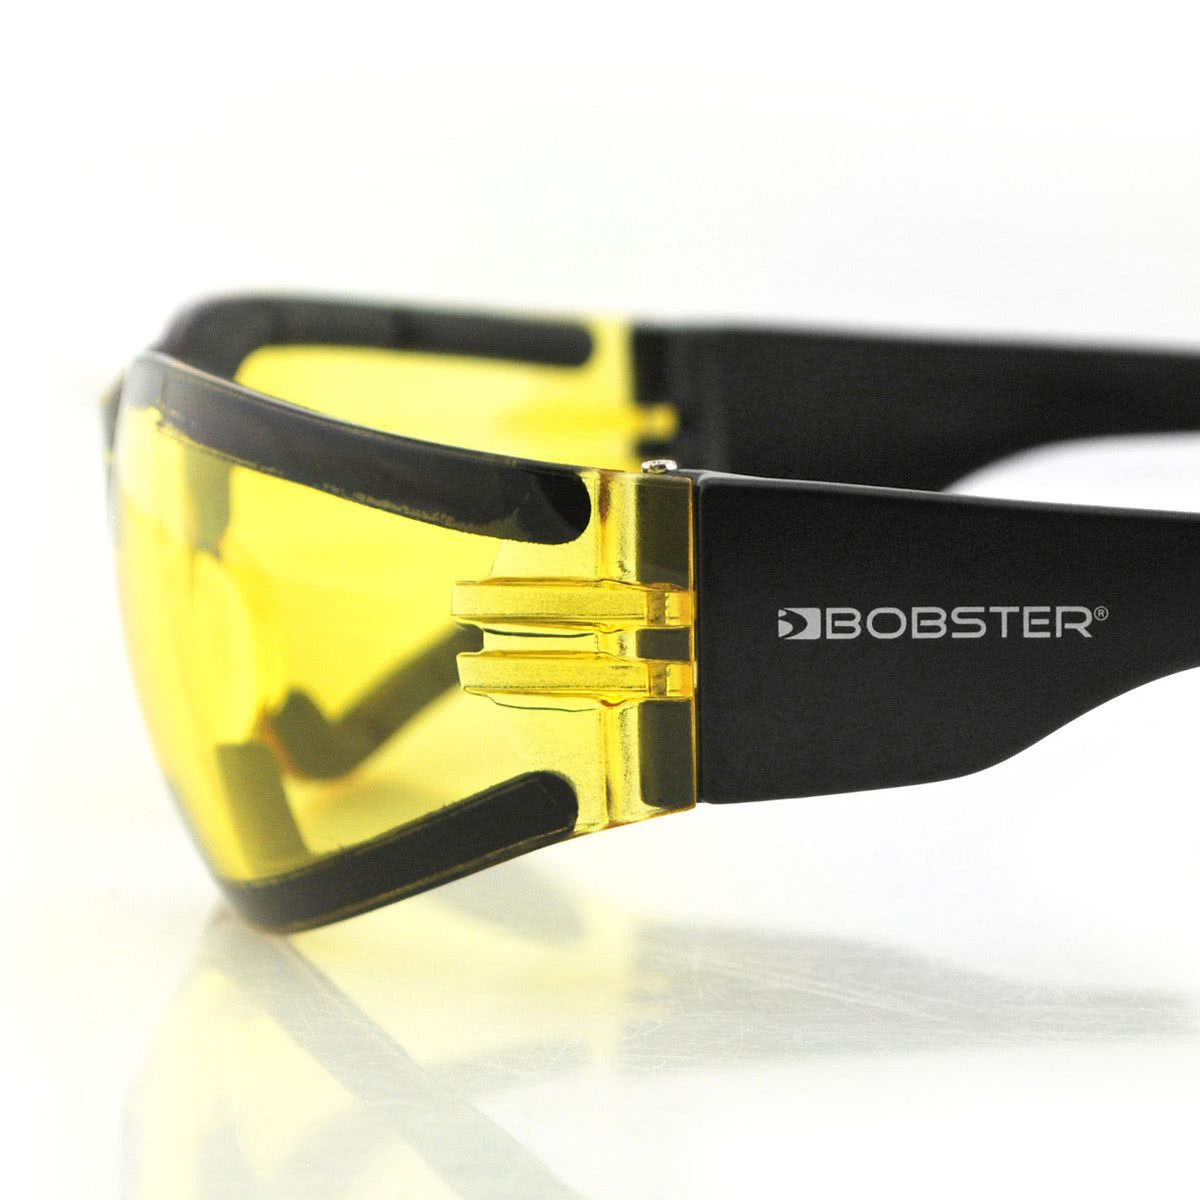 Bobster Shield III Sunglasses - Clothing & Accessories